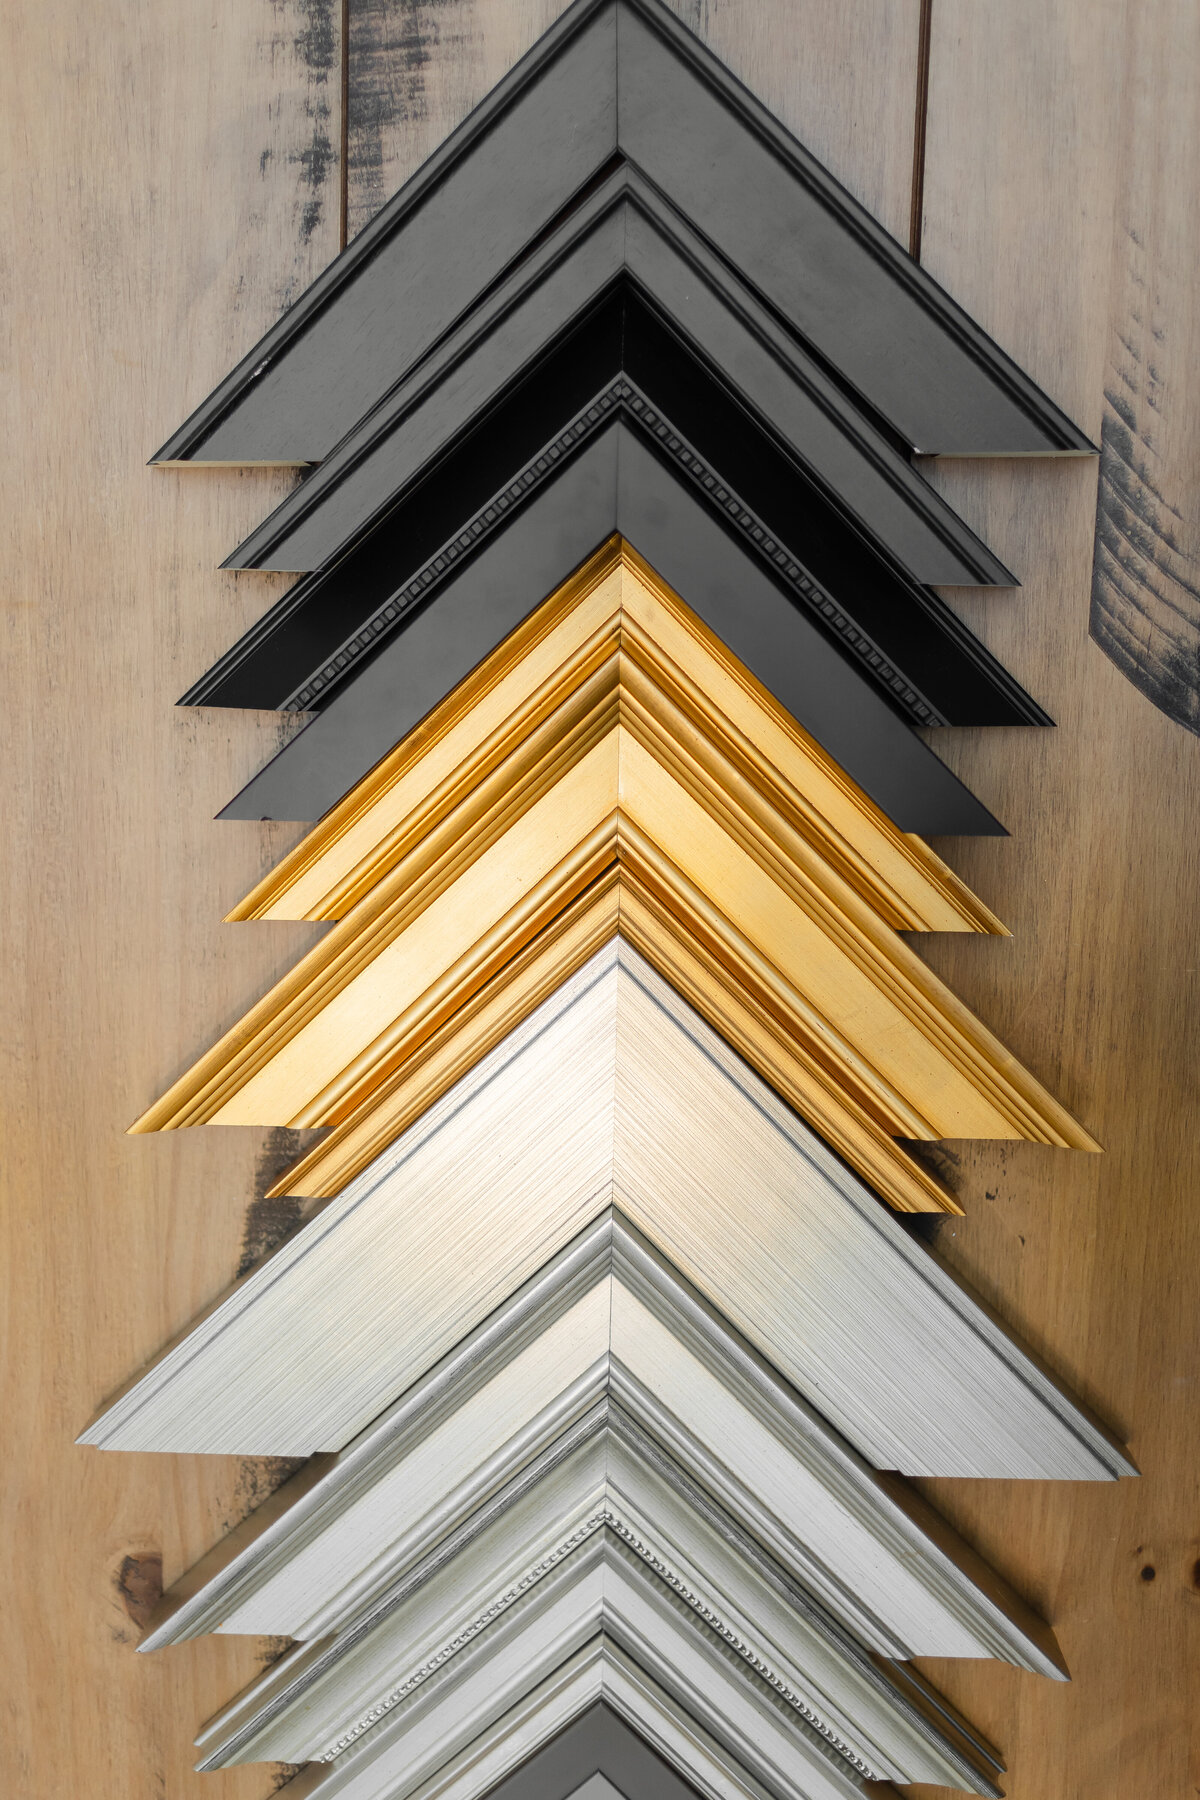 Black, white, silver, and gold Solid wood frame options by DC Portrait Photographer